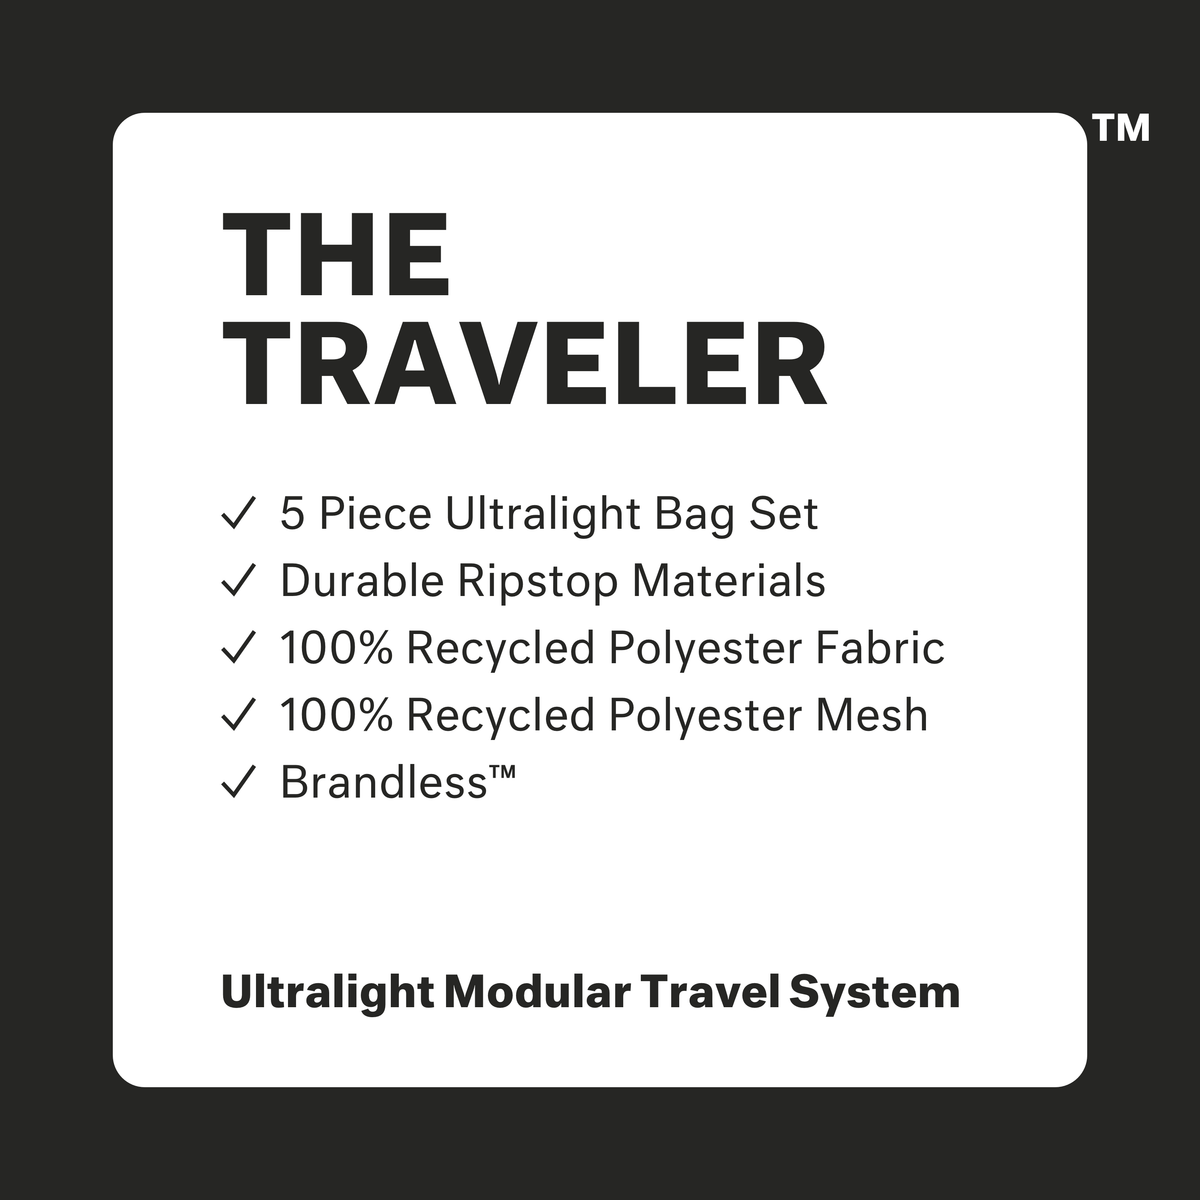 The Traveler: 5 piece ultralight bag set. Durable ripstop materials. 100% recycled polyester fabric. 100% recycled polyester mesh.  Brandless. Ultralight modular travel system.